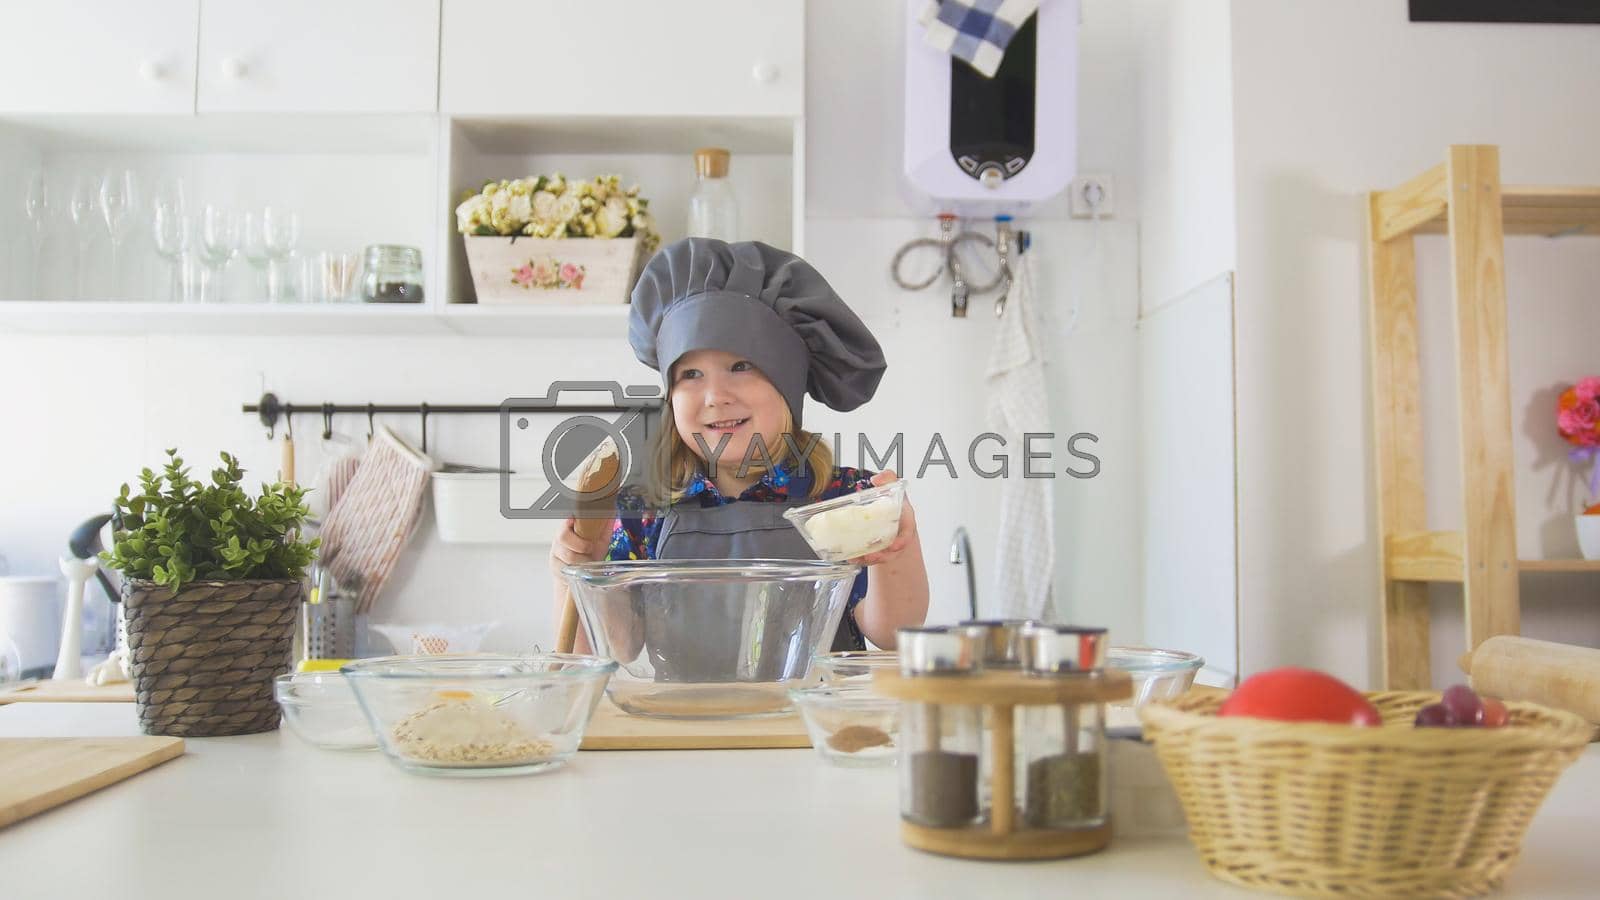 Royalty free image of Little girl baker puts batter to the pastry dough for cooking biscuits by Studia72